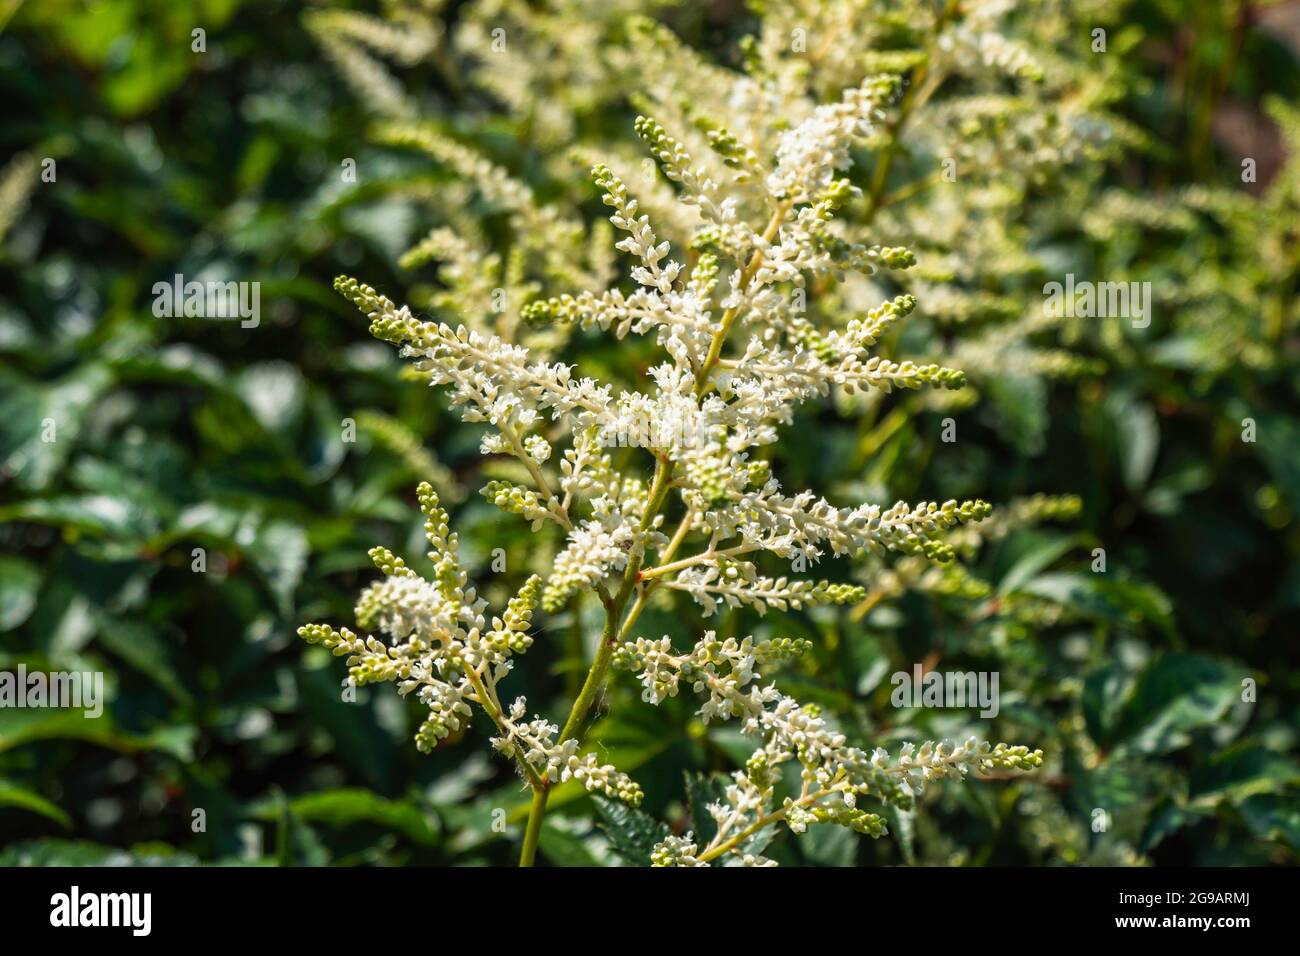 White Astilbe Flowers Growing in a Garden on a Green Background Stock Photo